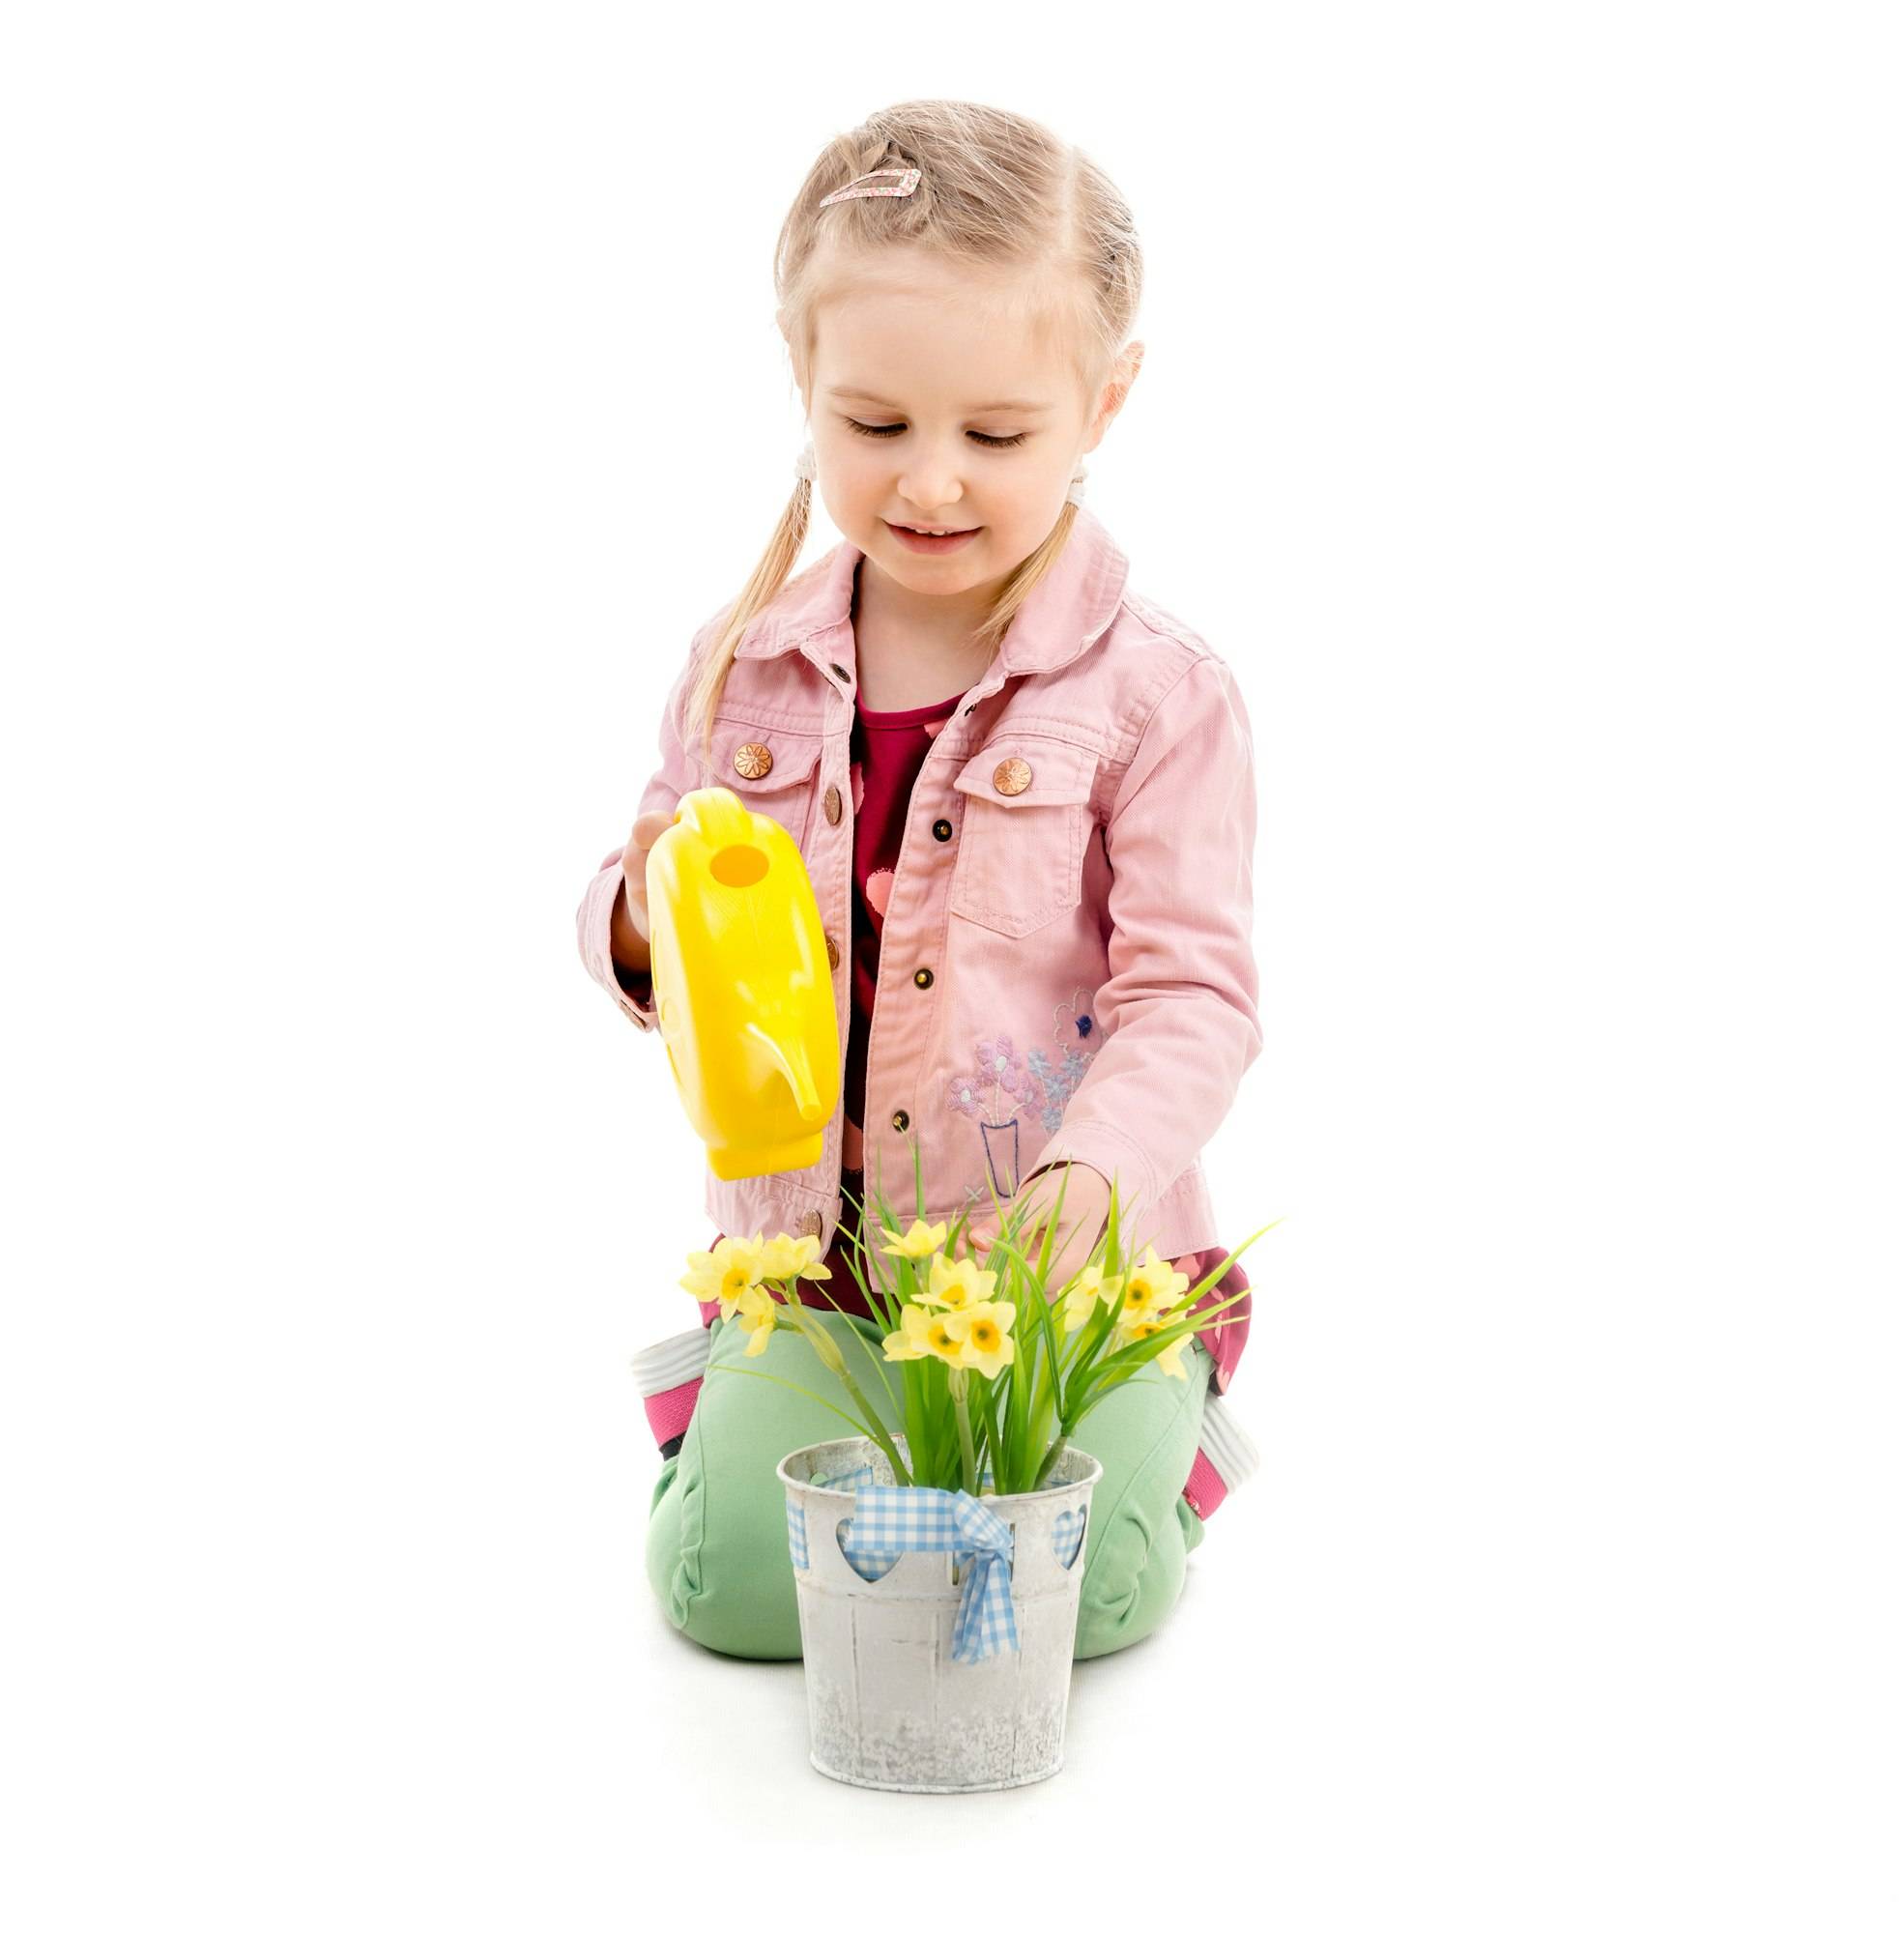 kid watering flowers, isolated on white background